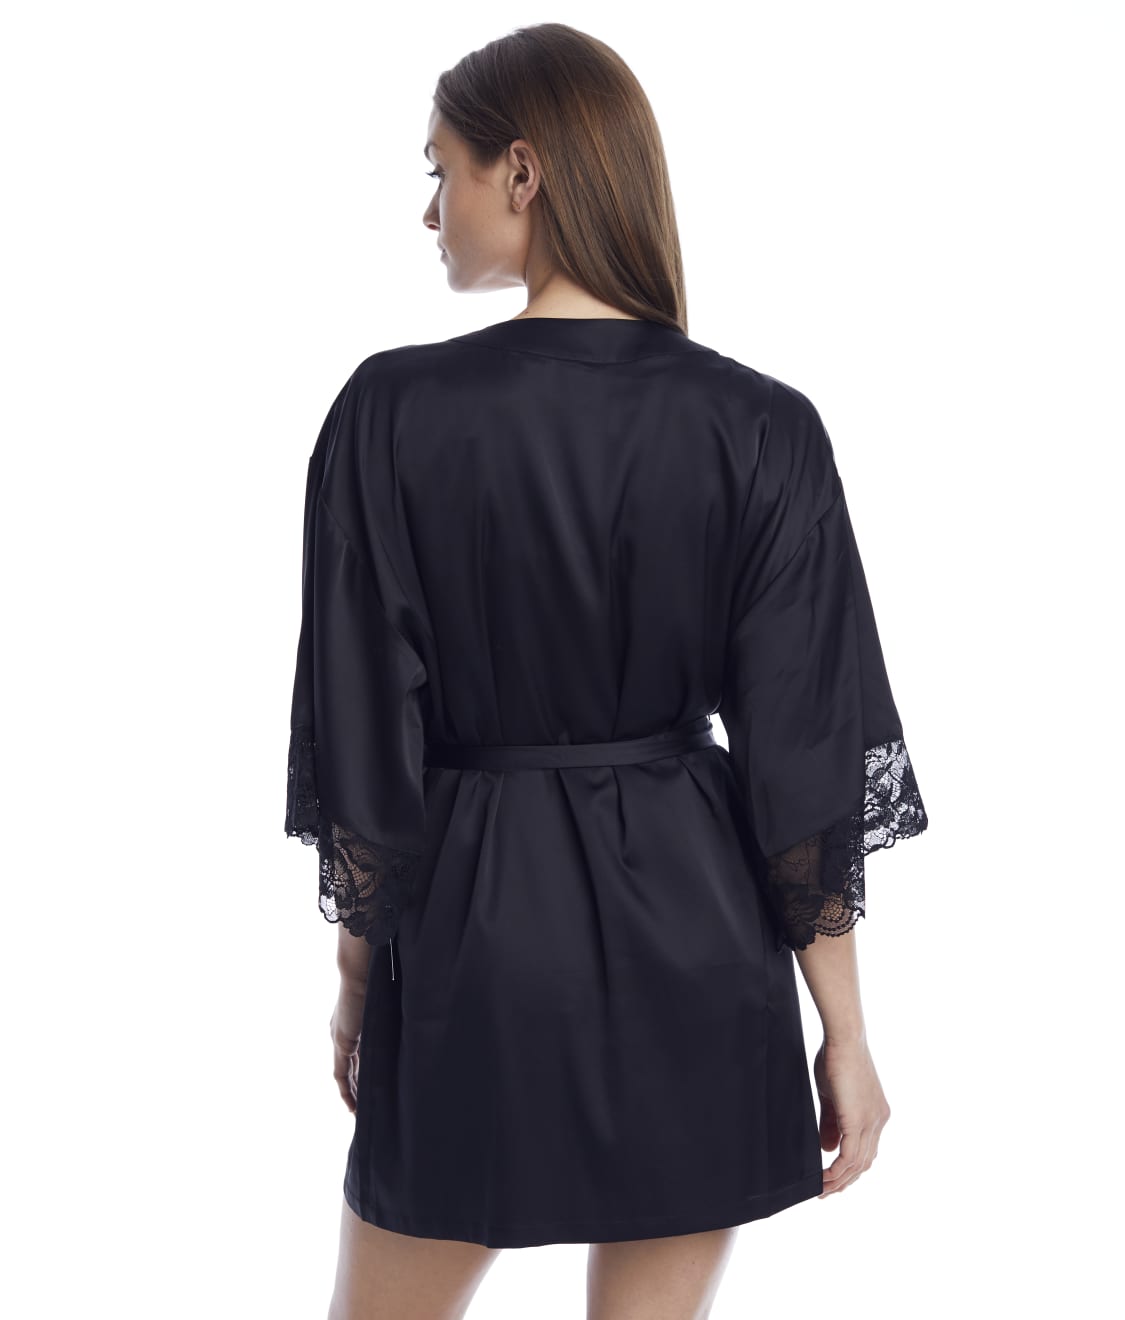 Details about   Sexy Black Delicate Lace Short Kimono Robe with Wide Sleeves Size 8-10 